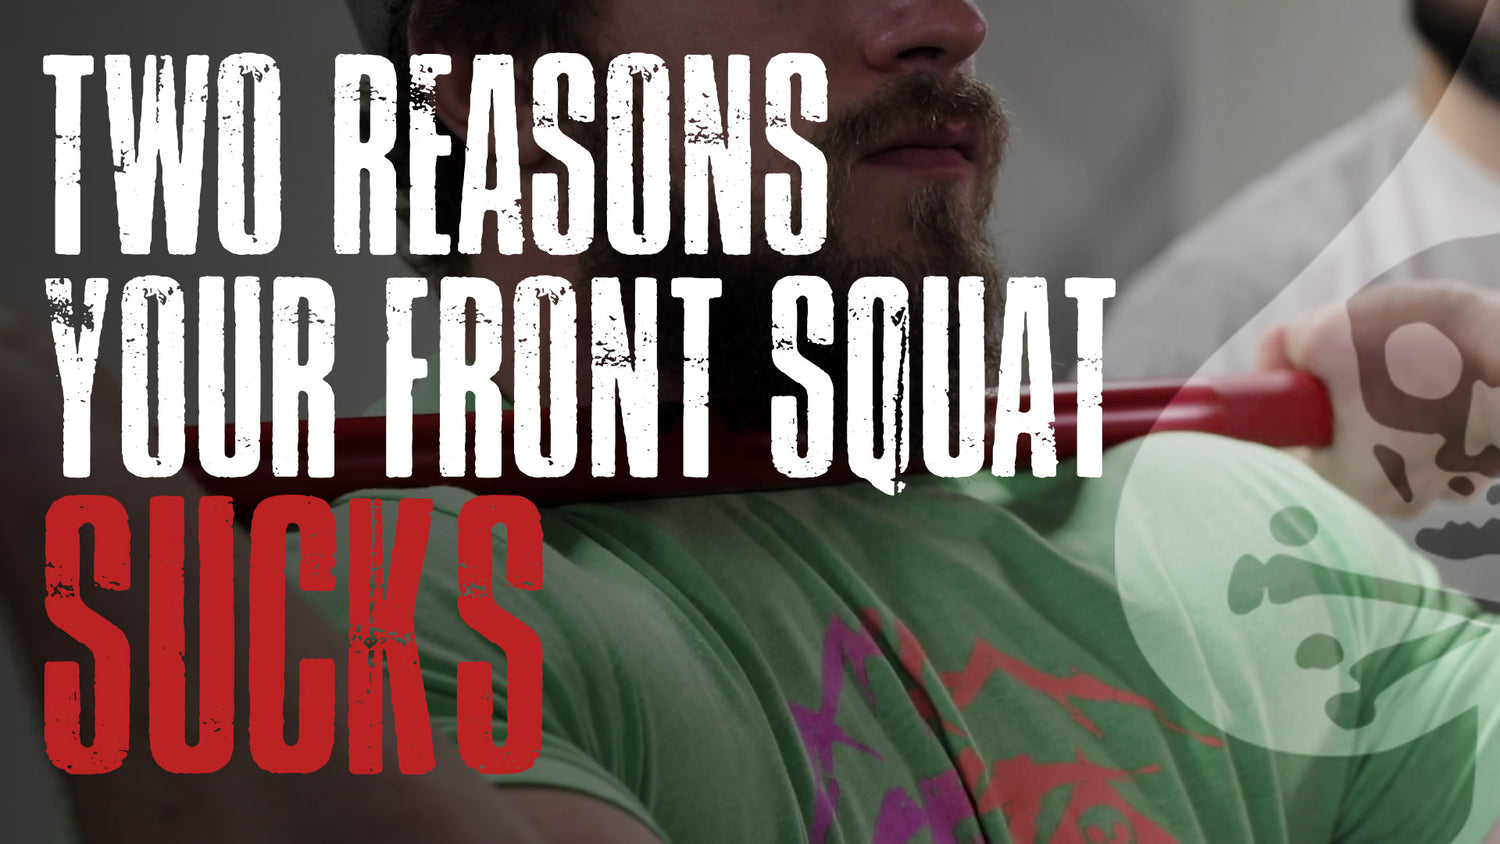 Two Reasons Your Front Squat SUCKS!